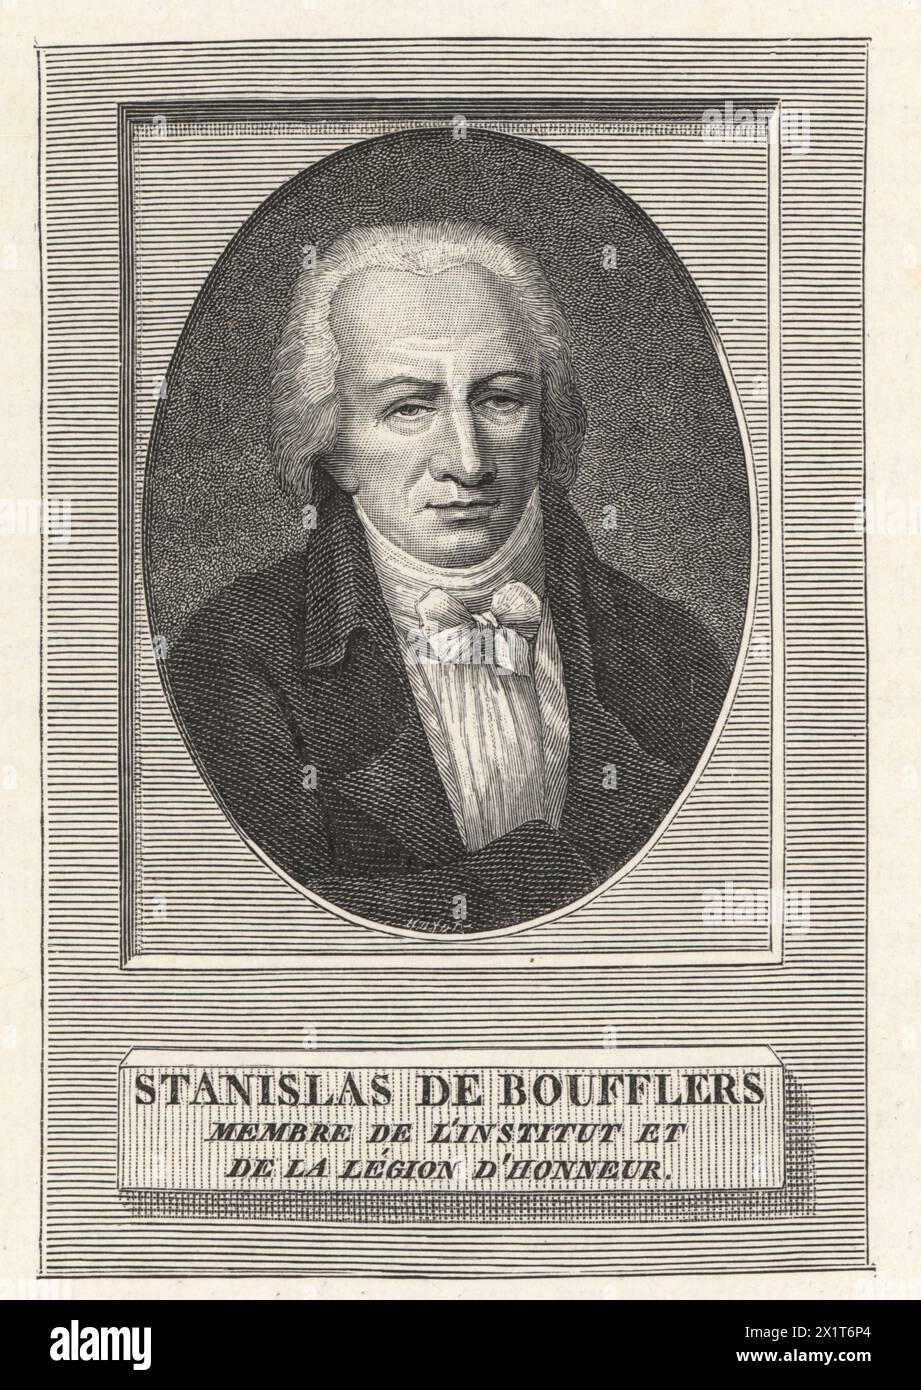 Stanislas Jean, chevalier de Boufflers, French statesman and writer, 1738-1815. Member of the Institut de France and Legion d'Honneur. Stanislas de Boufflers, membre de l'Institut et de la Legion d'Honneur. Portrait engraved by Madame Benoist  from Paul Lacroix's Directoire, Consulat et Empire, (Directory, Consulate and Empire), Paris, 1884. Stock Photo